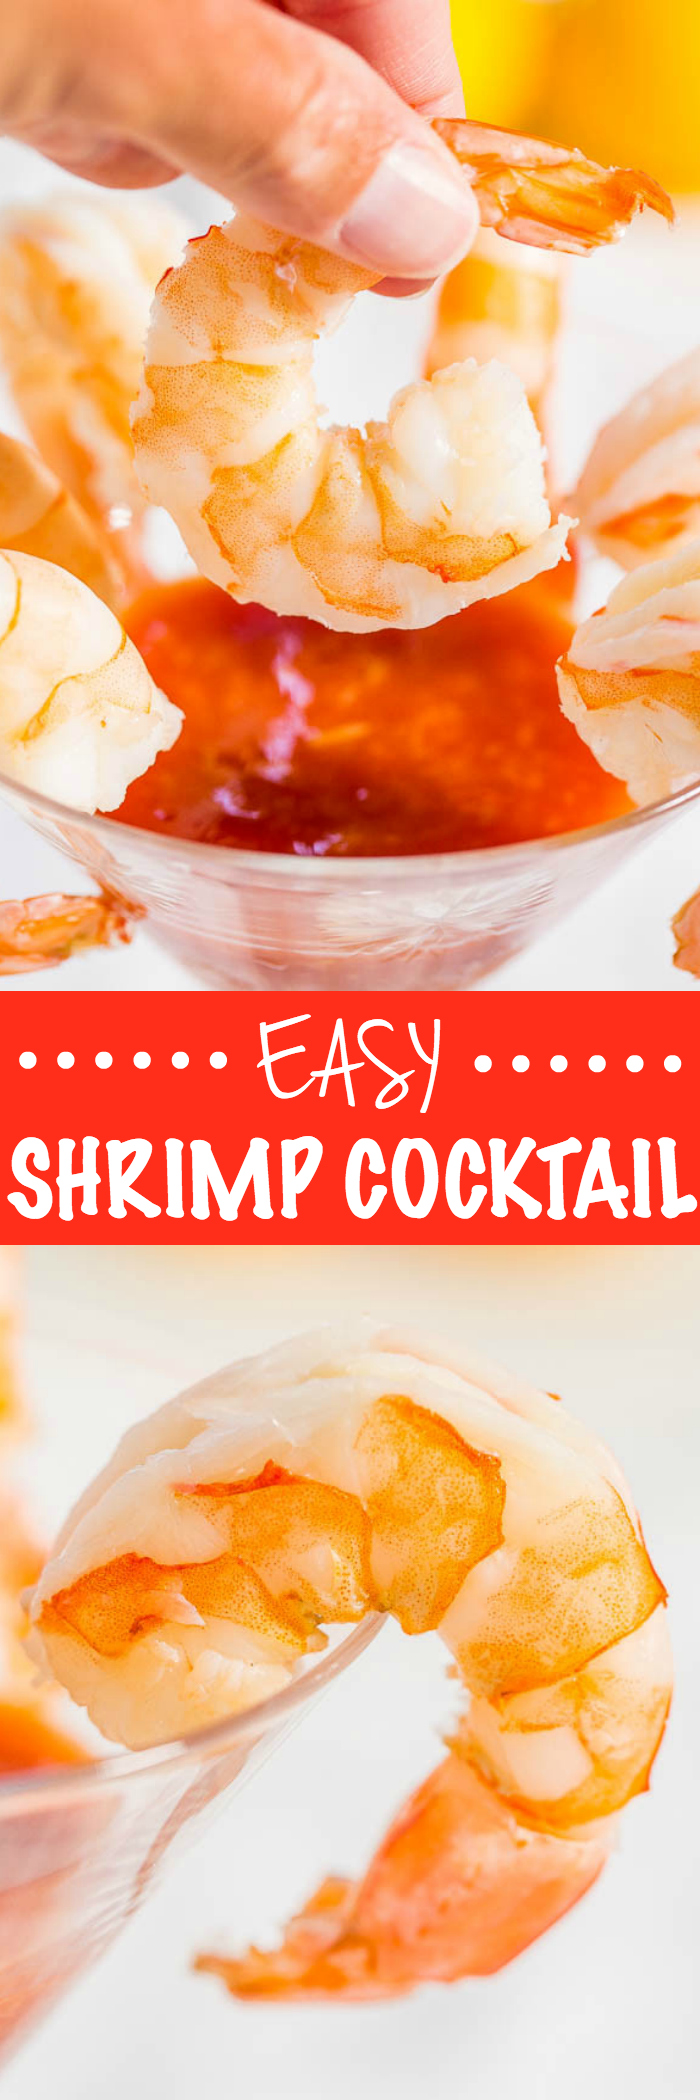 Easy Shrimp Cocktail - Goodbye overpriced deli trays. Learn the secrets to make your own perfect shrimp cocktail in 15 minutes!! Juicy, sweet and sooo much more flavor!!